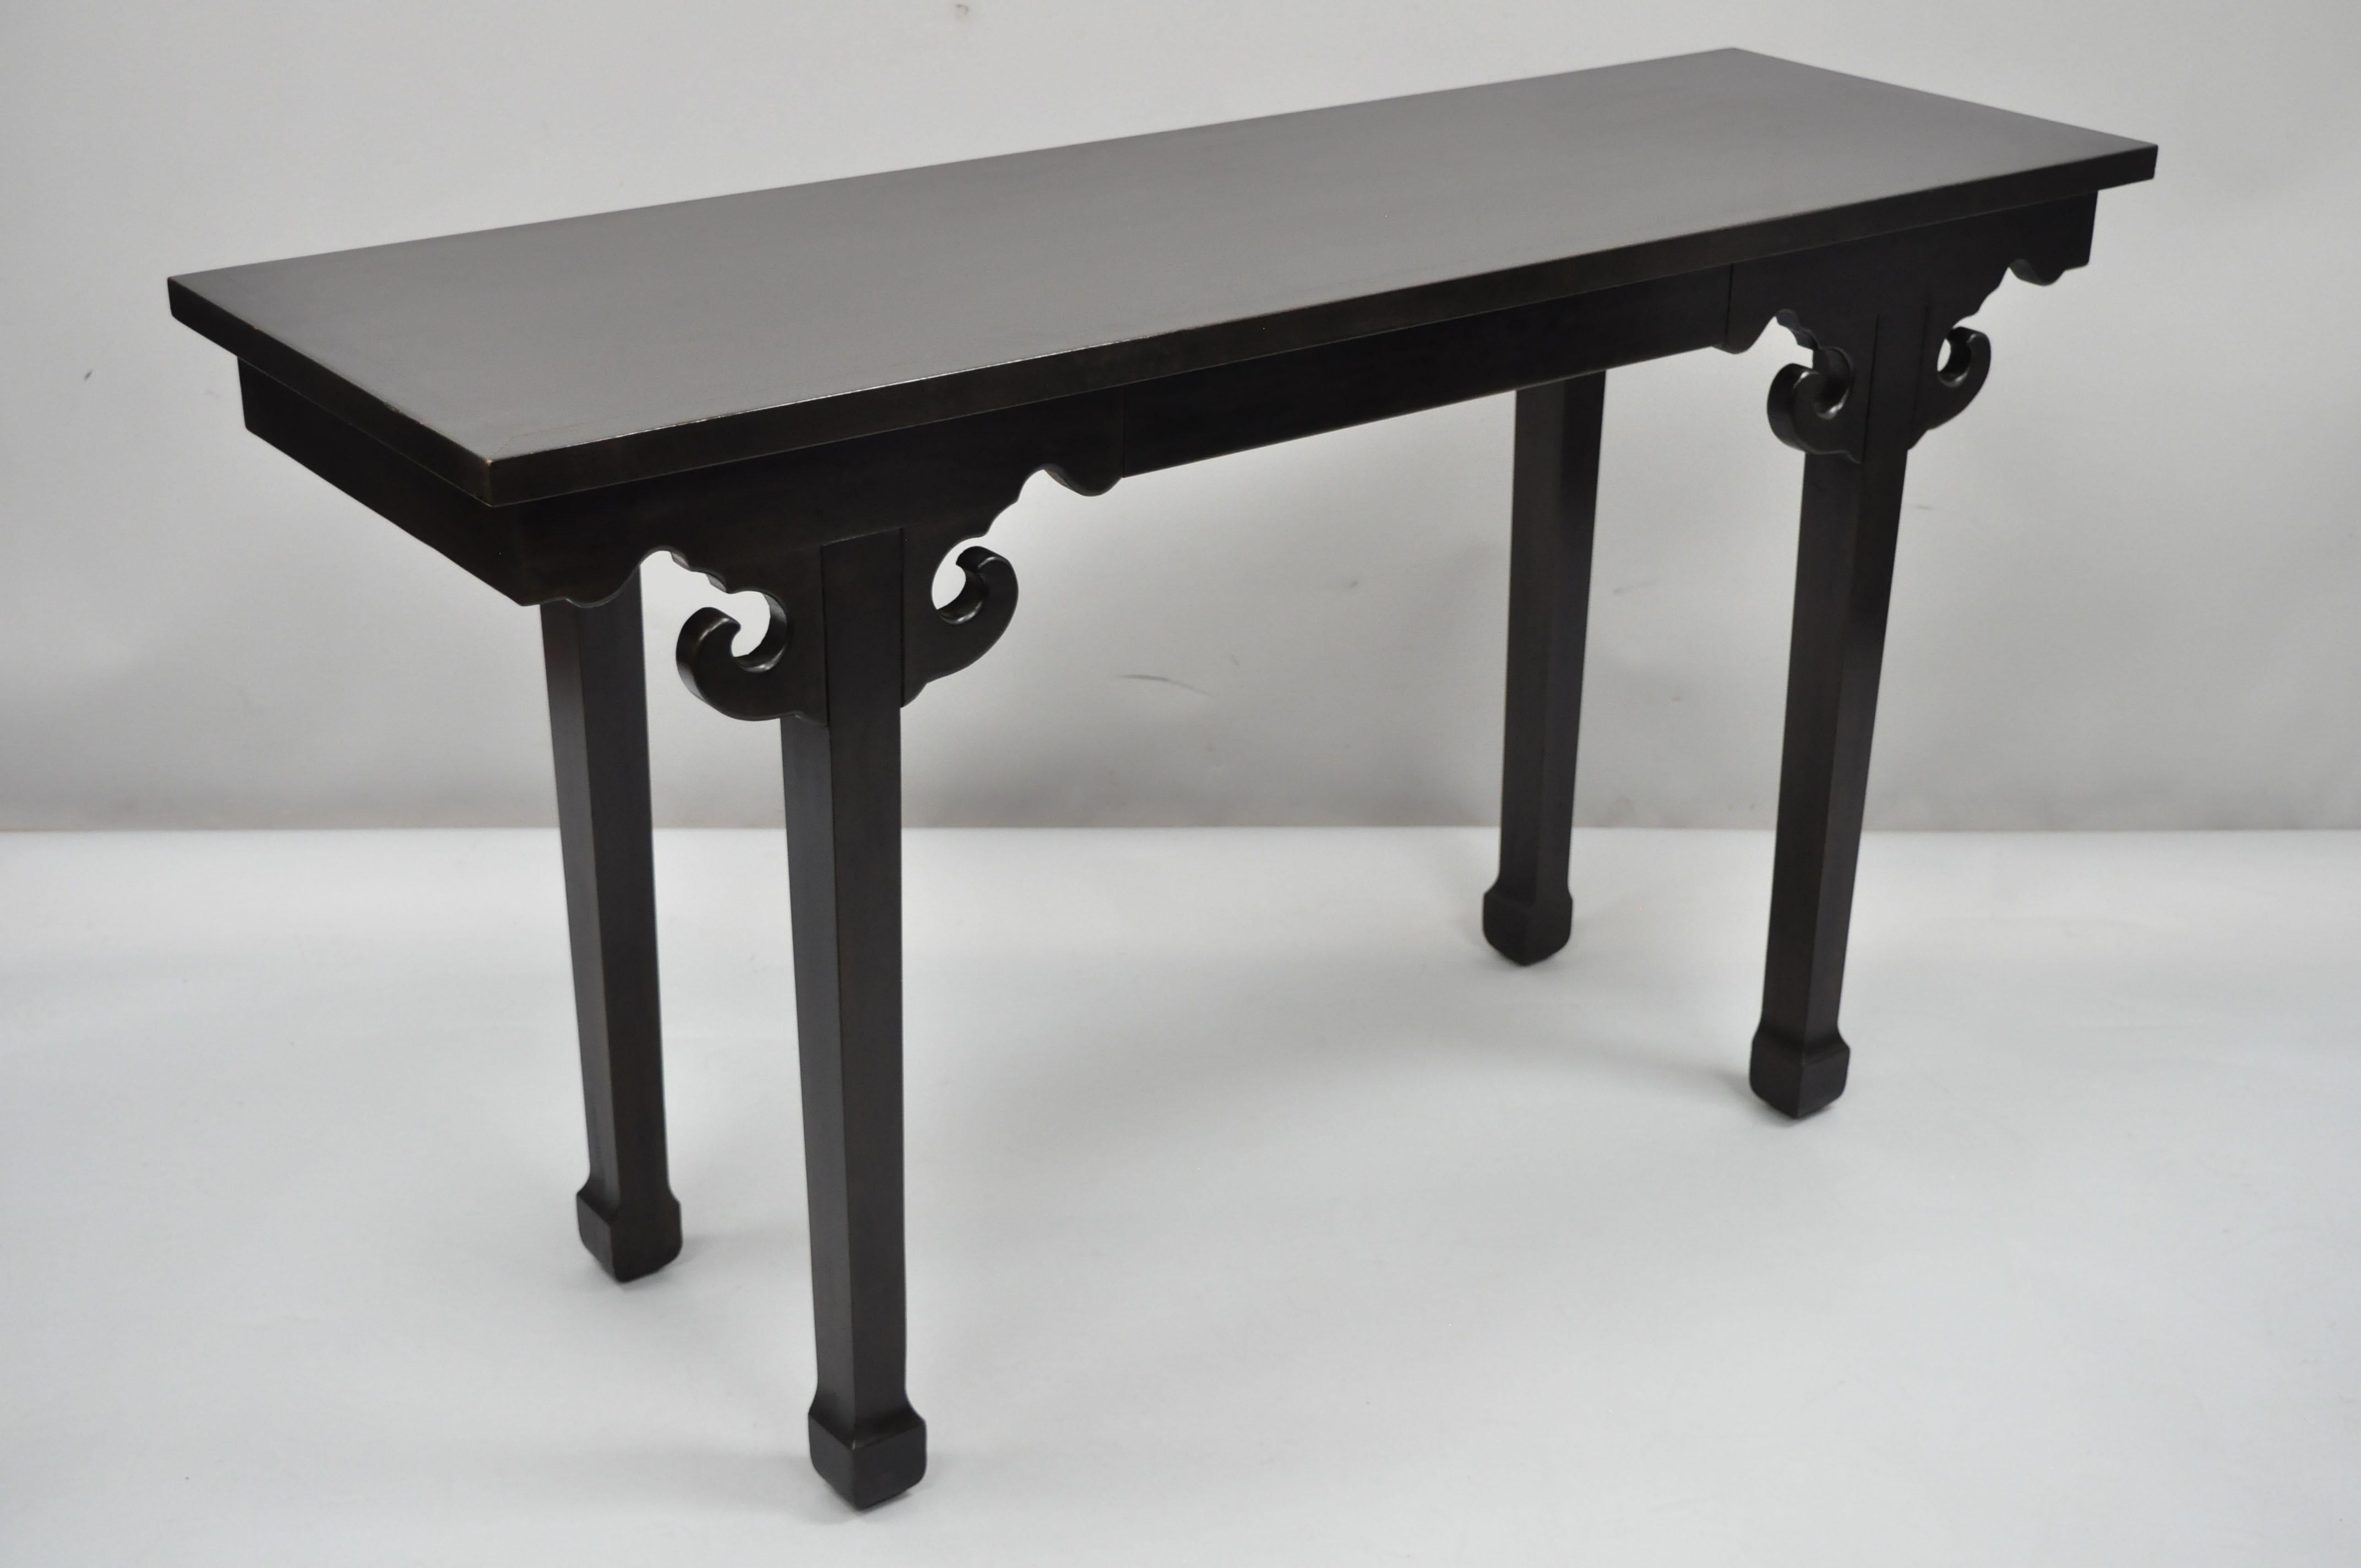 Vintage ebonized Chinese Altar table console hall 28 x 50 James Mont style sofa table (B). Item features solid wood construction, distressed finish, nicely carved details, finished back, 1 dovetailed drawer, quality craftsmanship, great style and